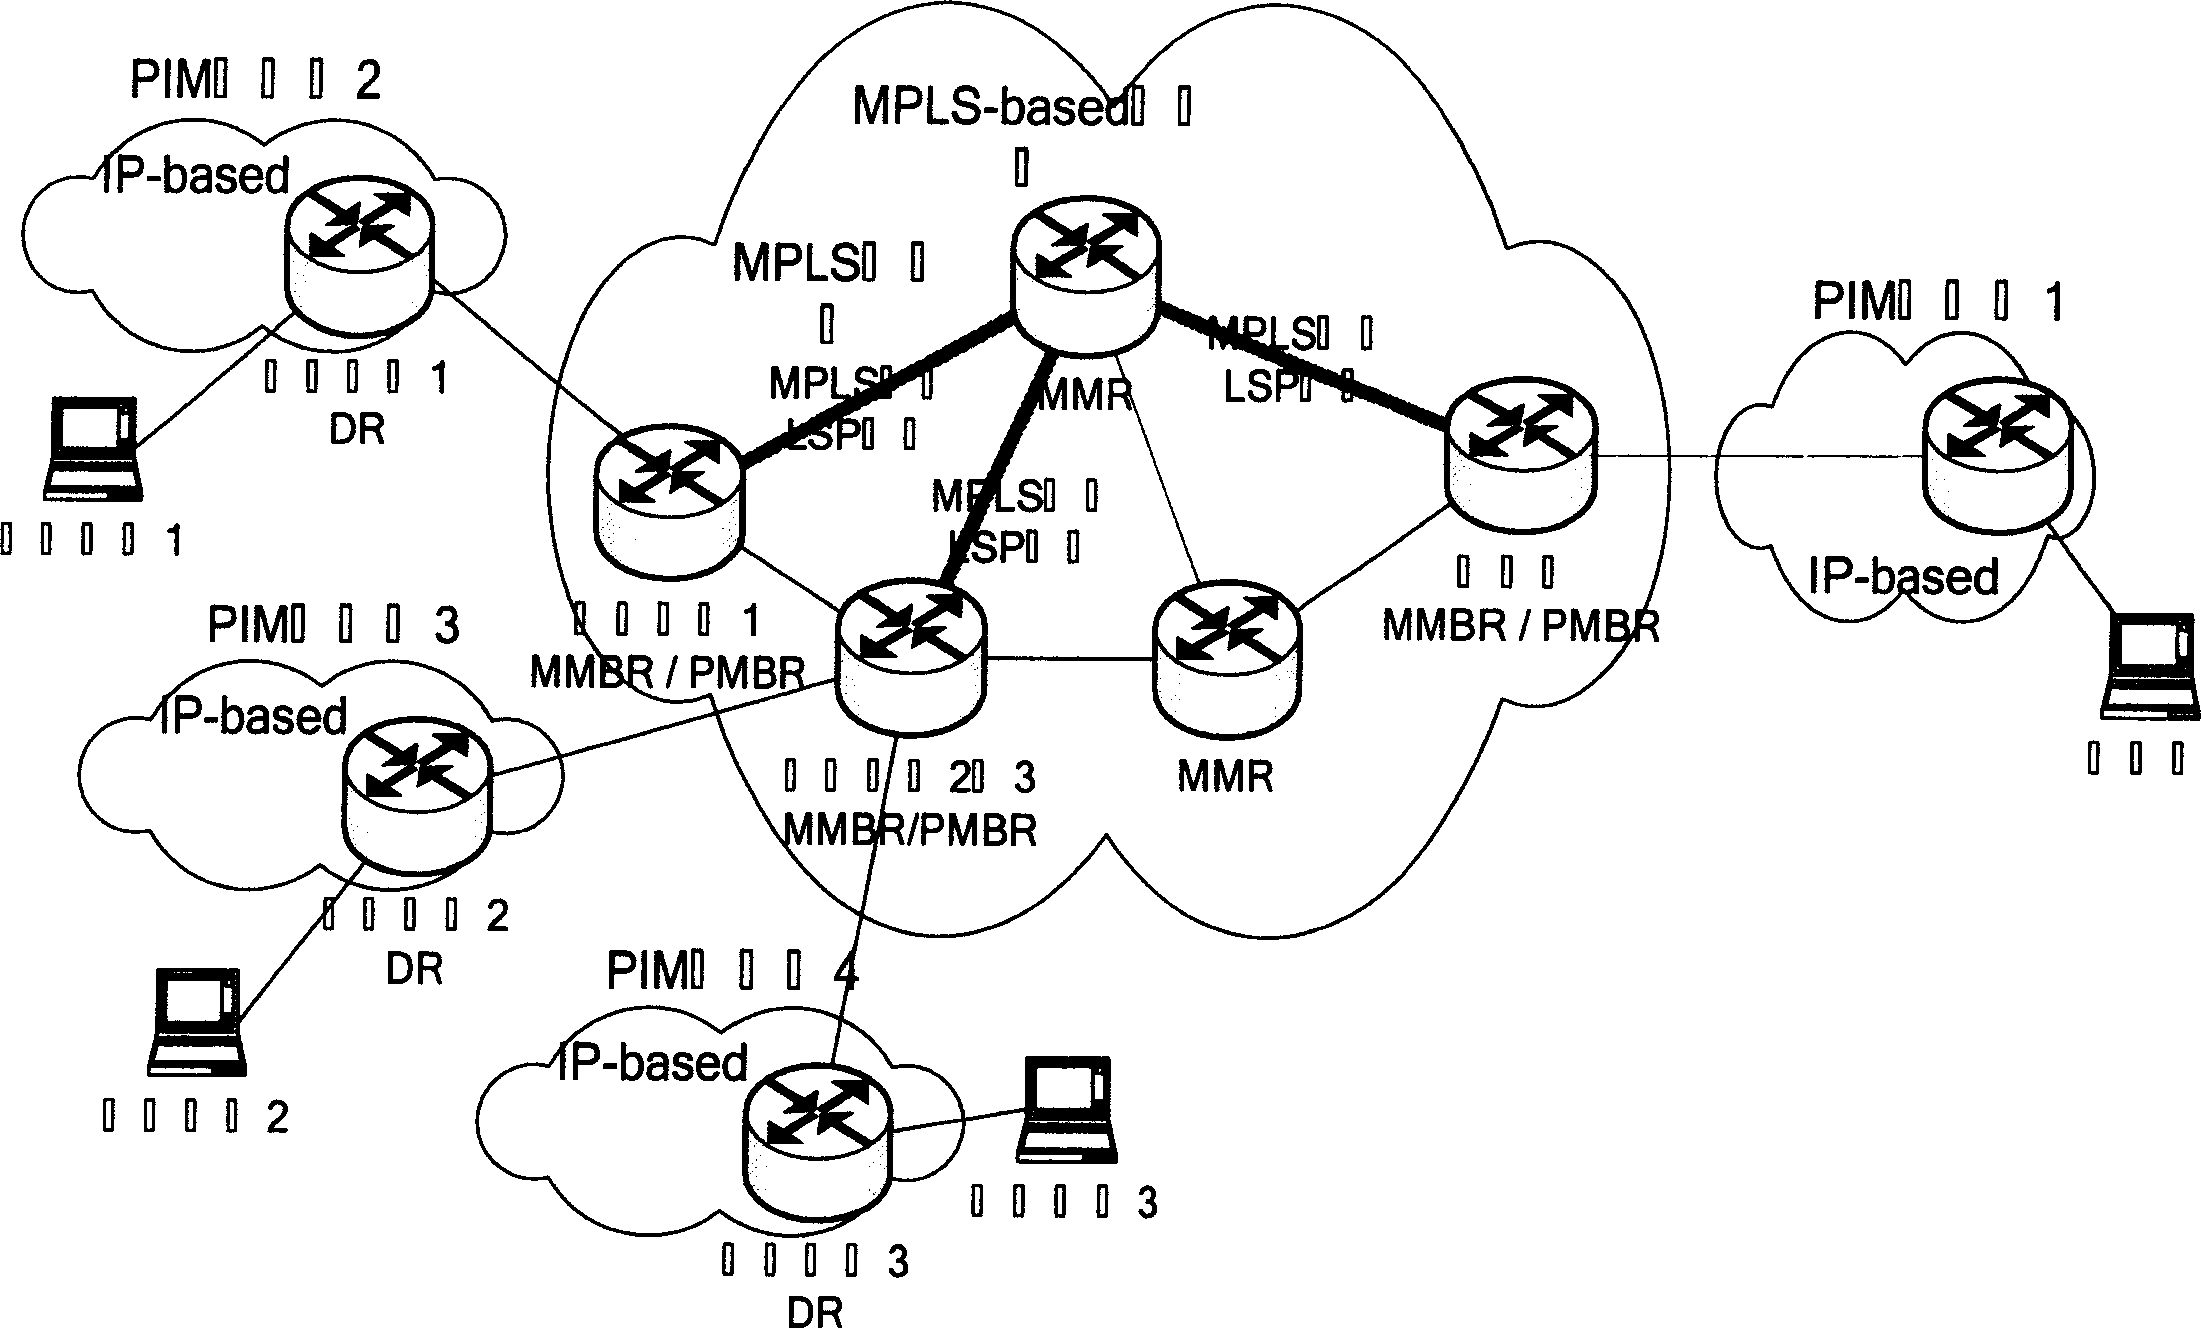 Multi-domain multicast integration data distributing structure and method based on IP/MPLS/BGP